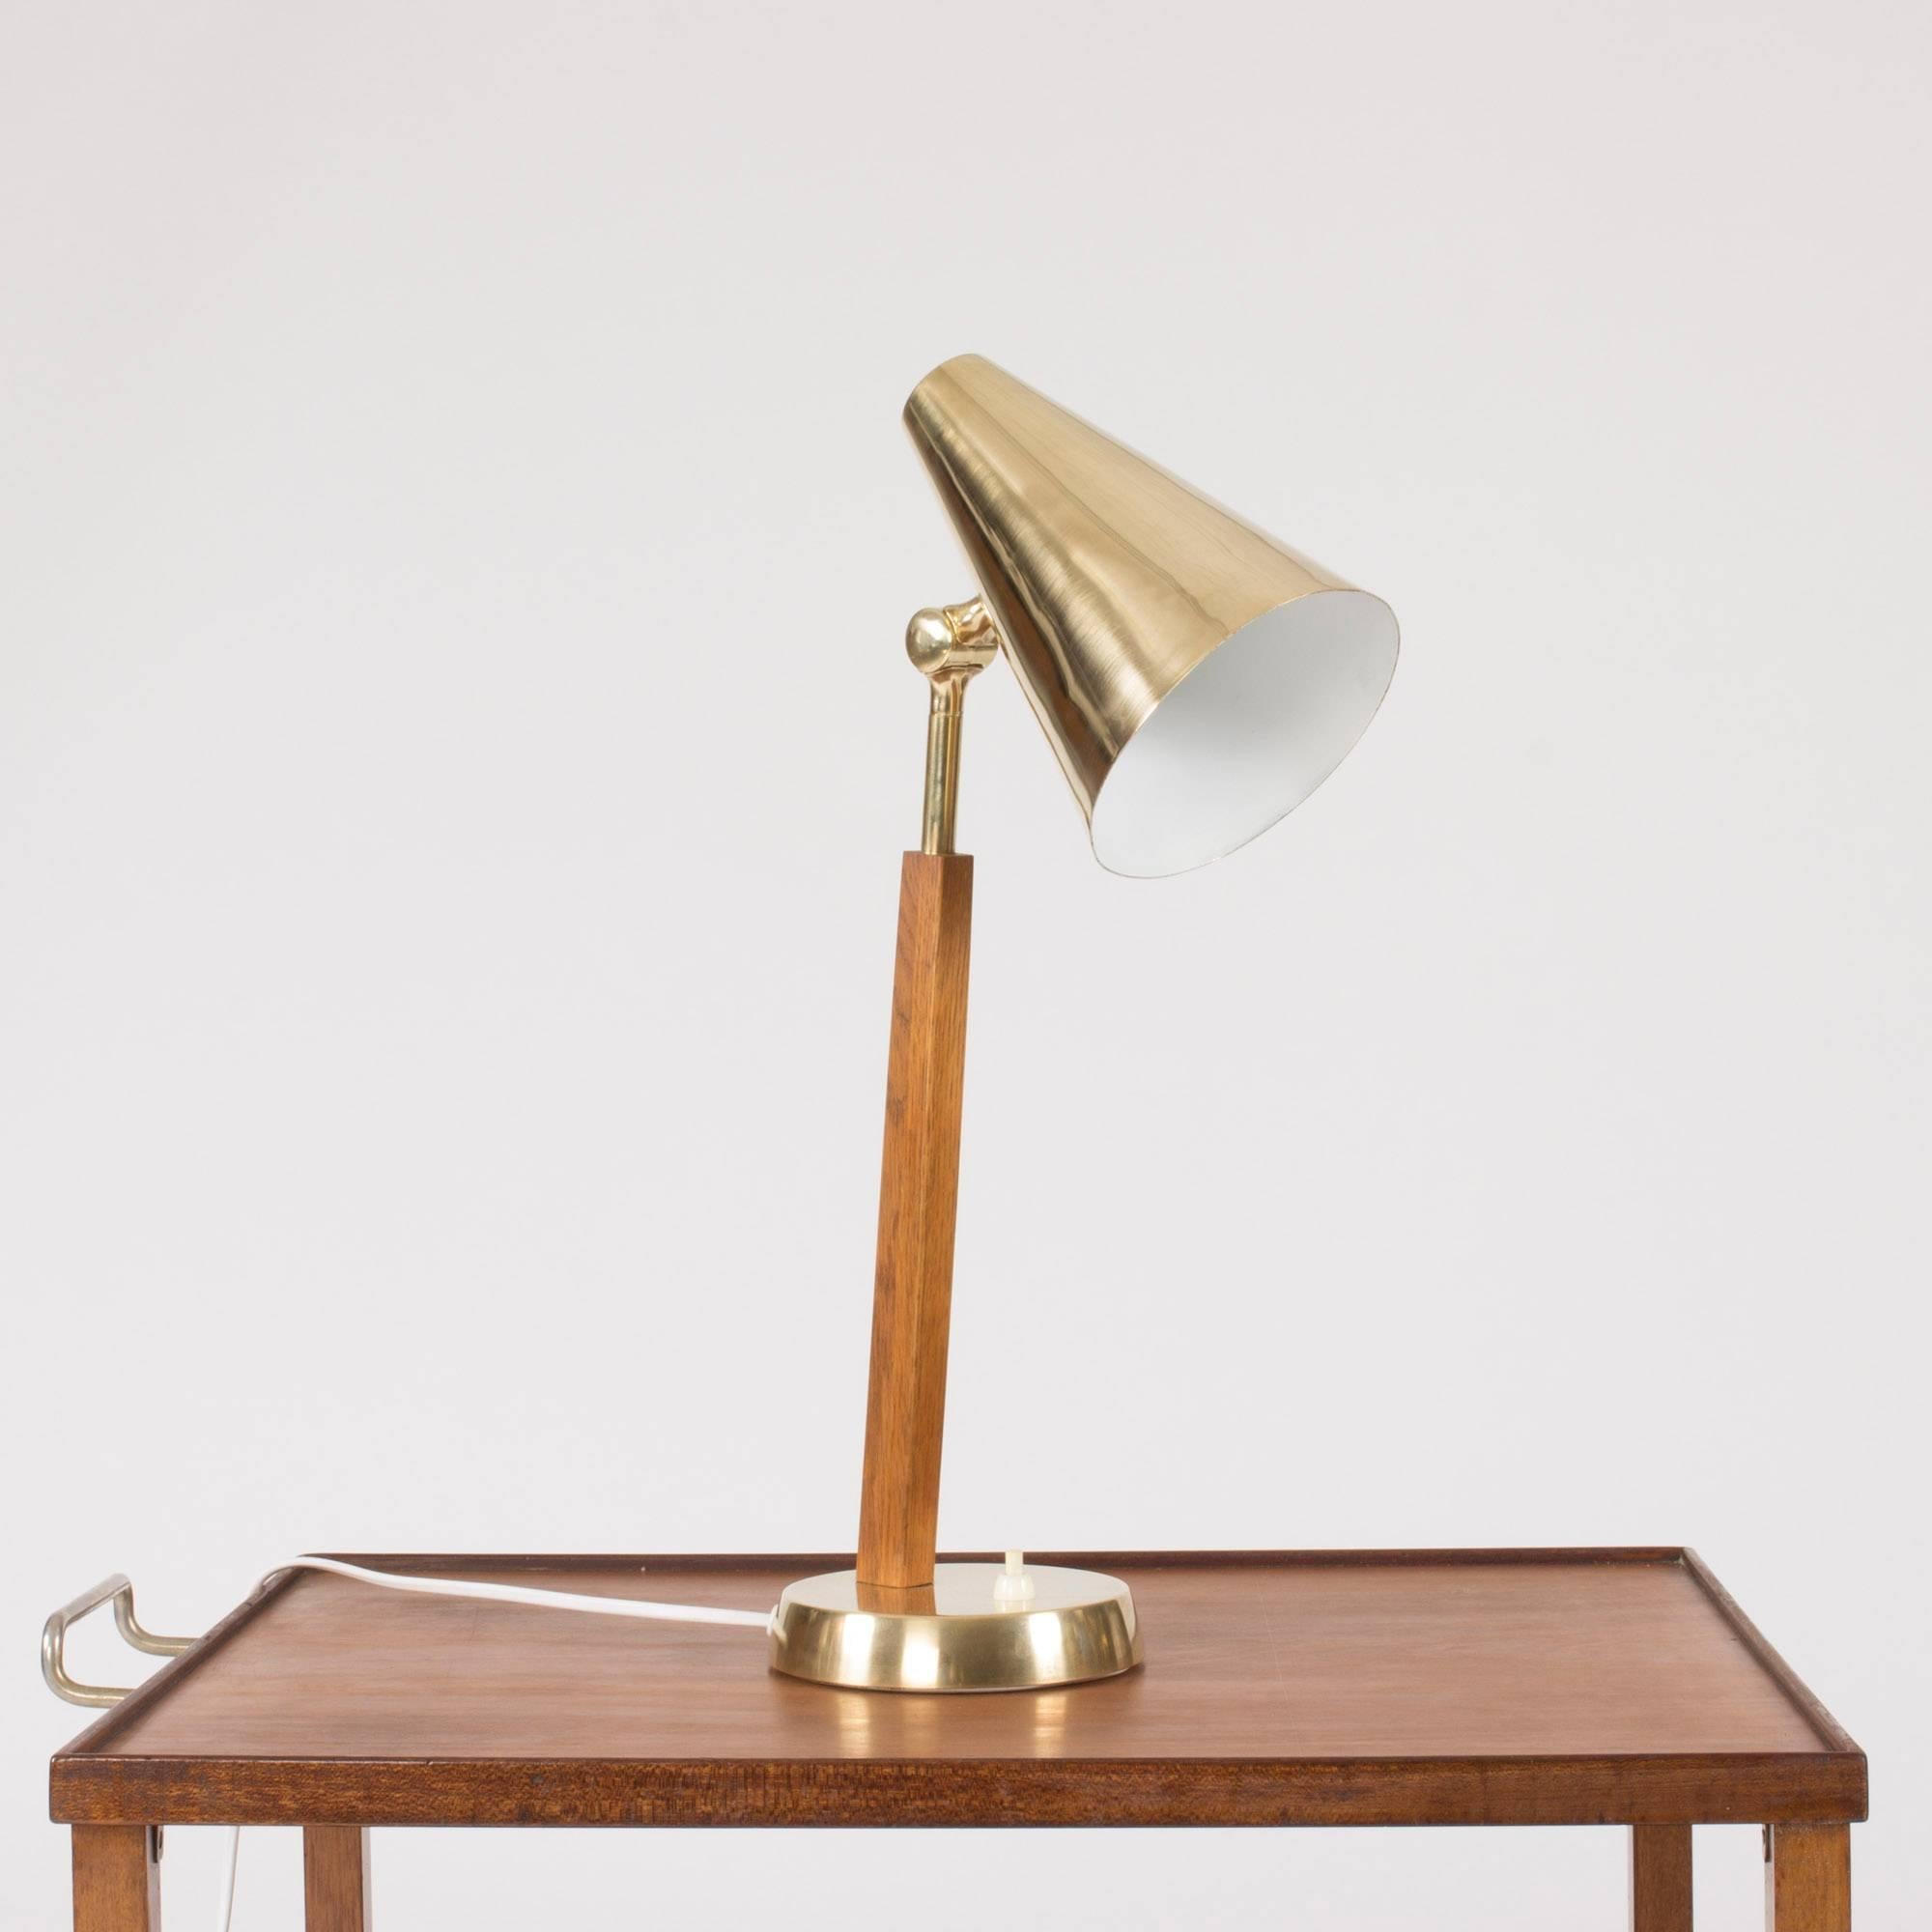 Superb brass desk lamp with teak handle from Falkenbergs Belysning. Great materials and proportions.